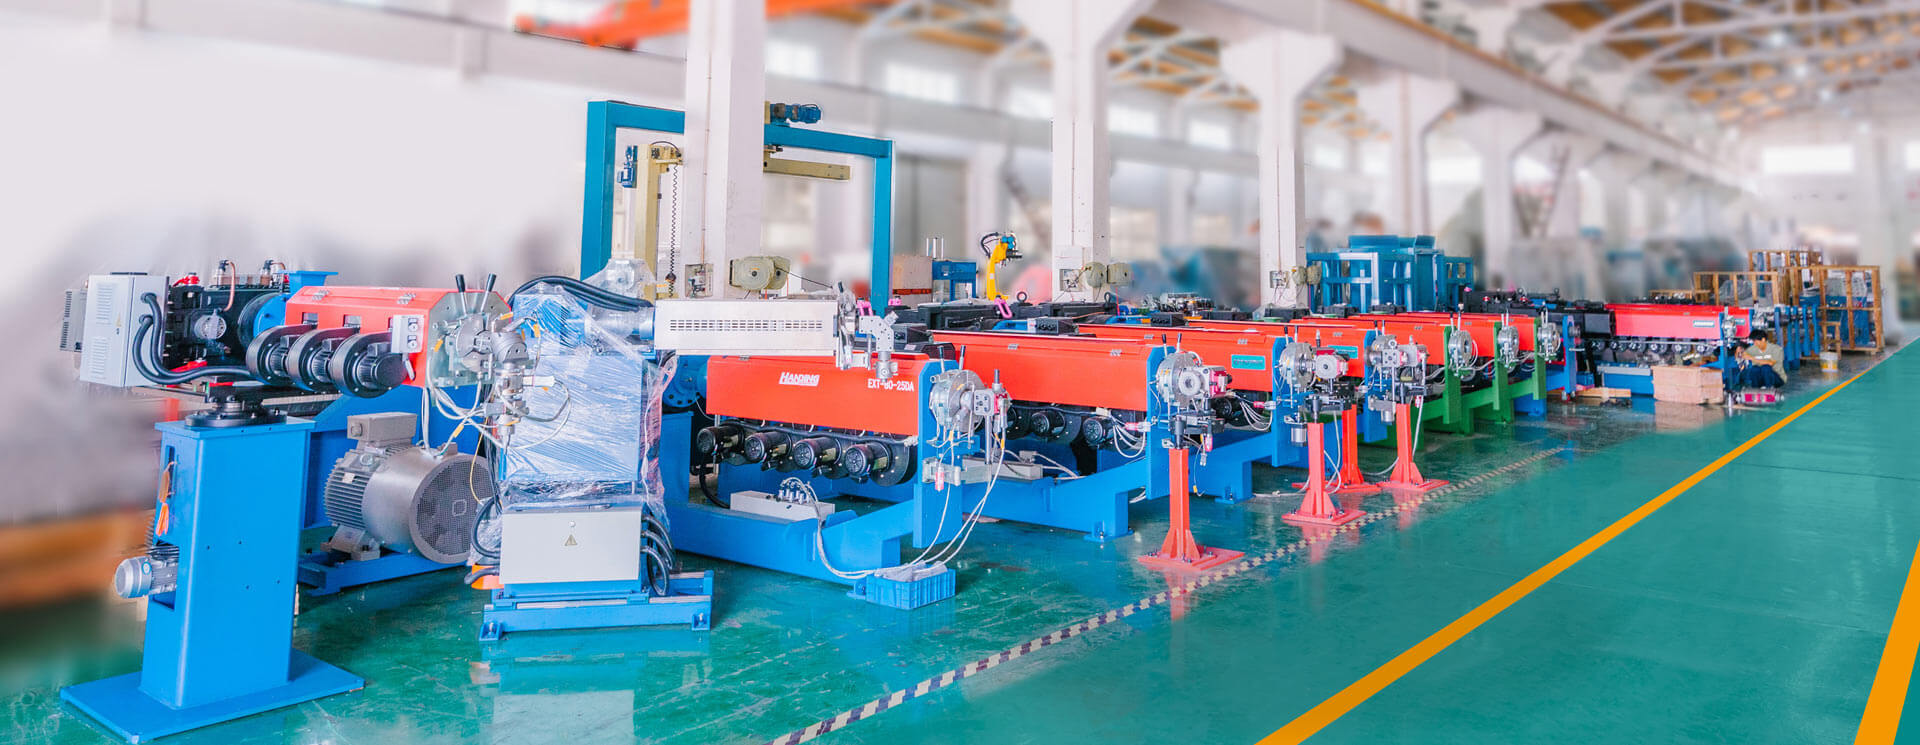 planetary strander manufacturer, cable taping machine factory